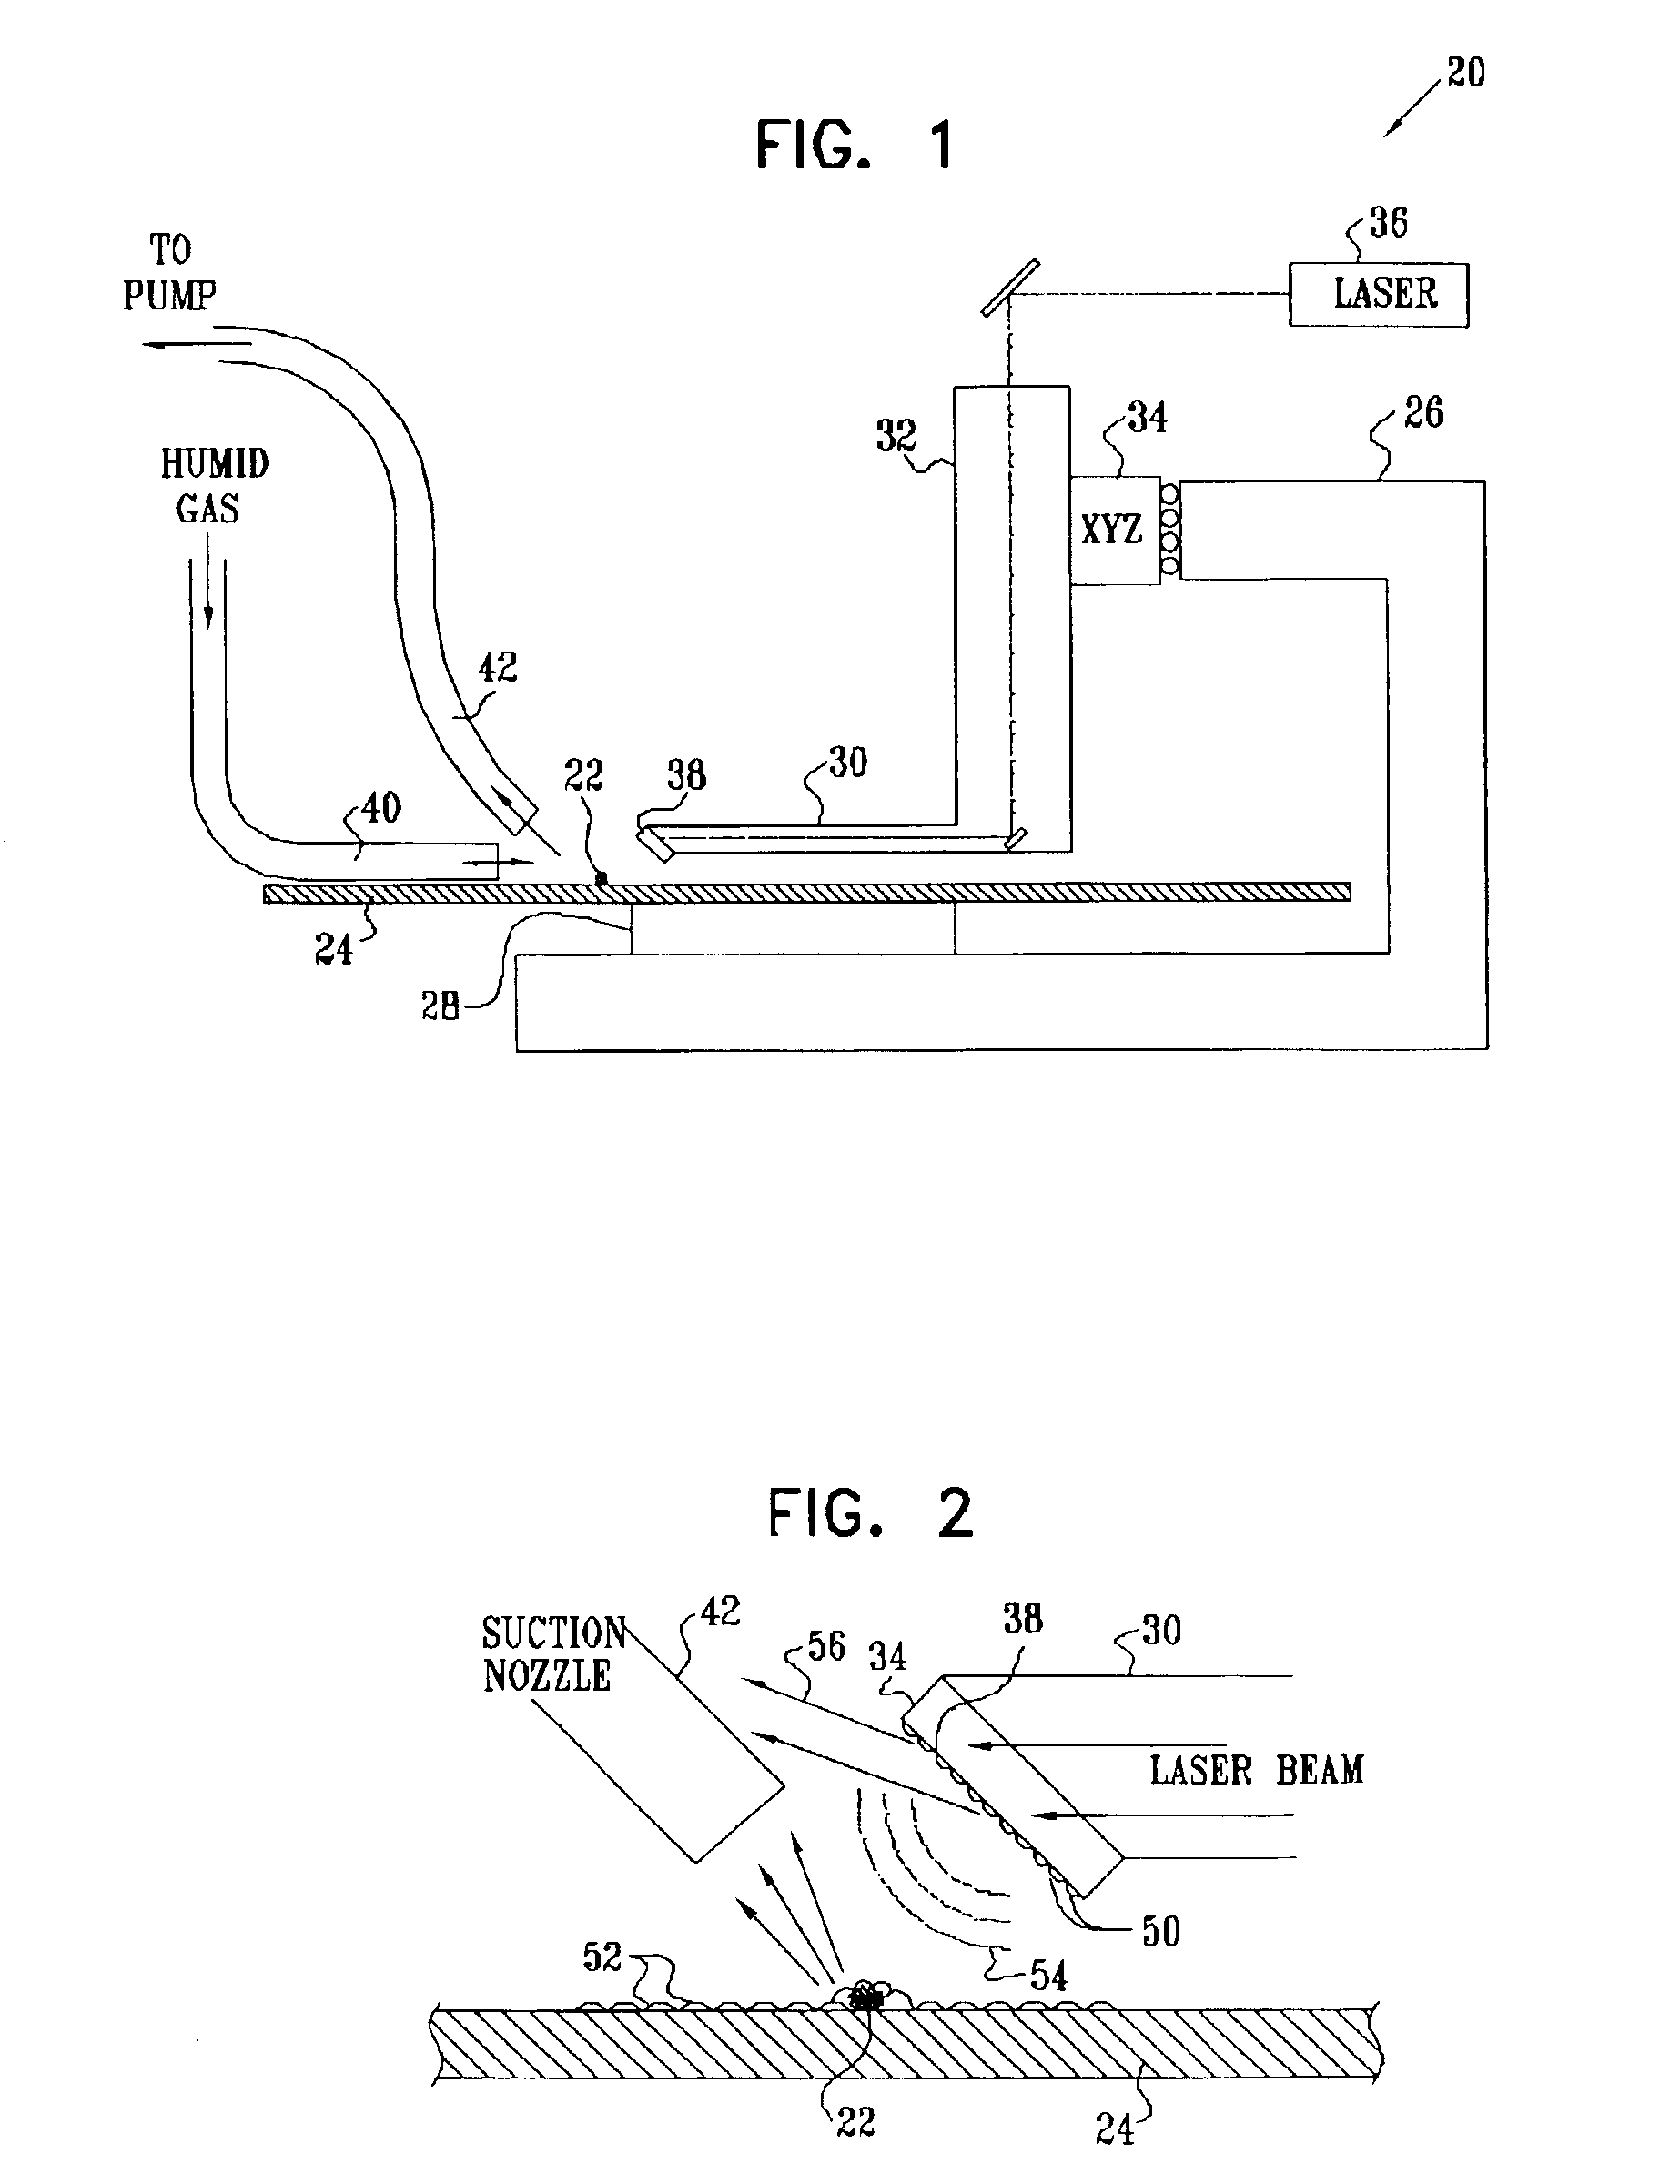 Contaminant removal by laser-accelerated fluid